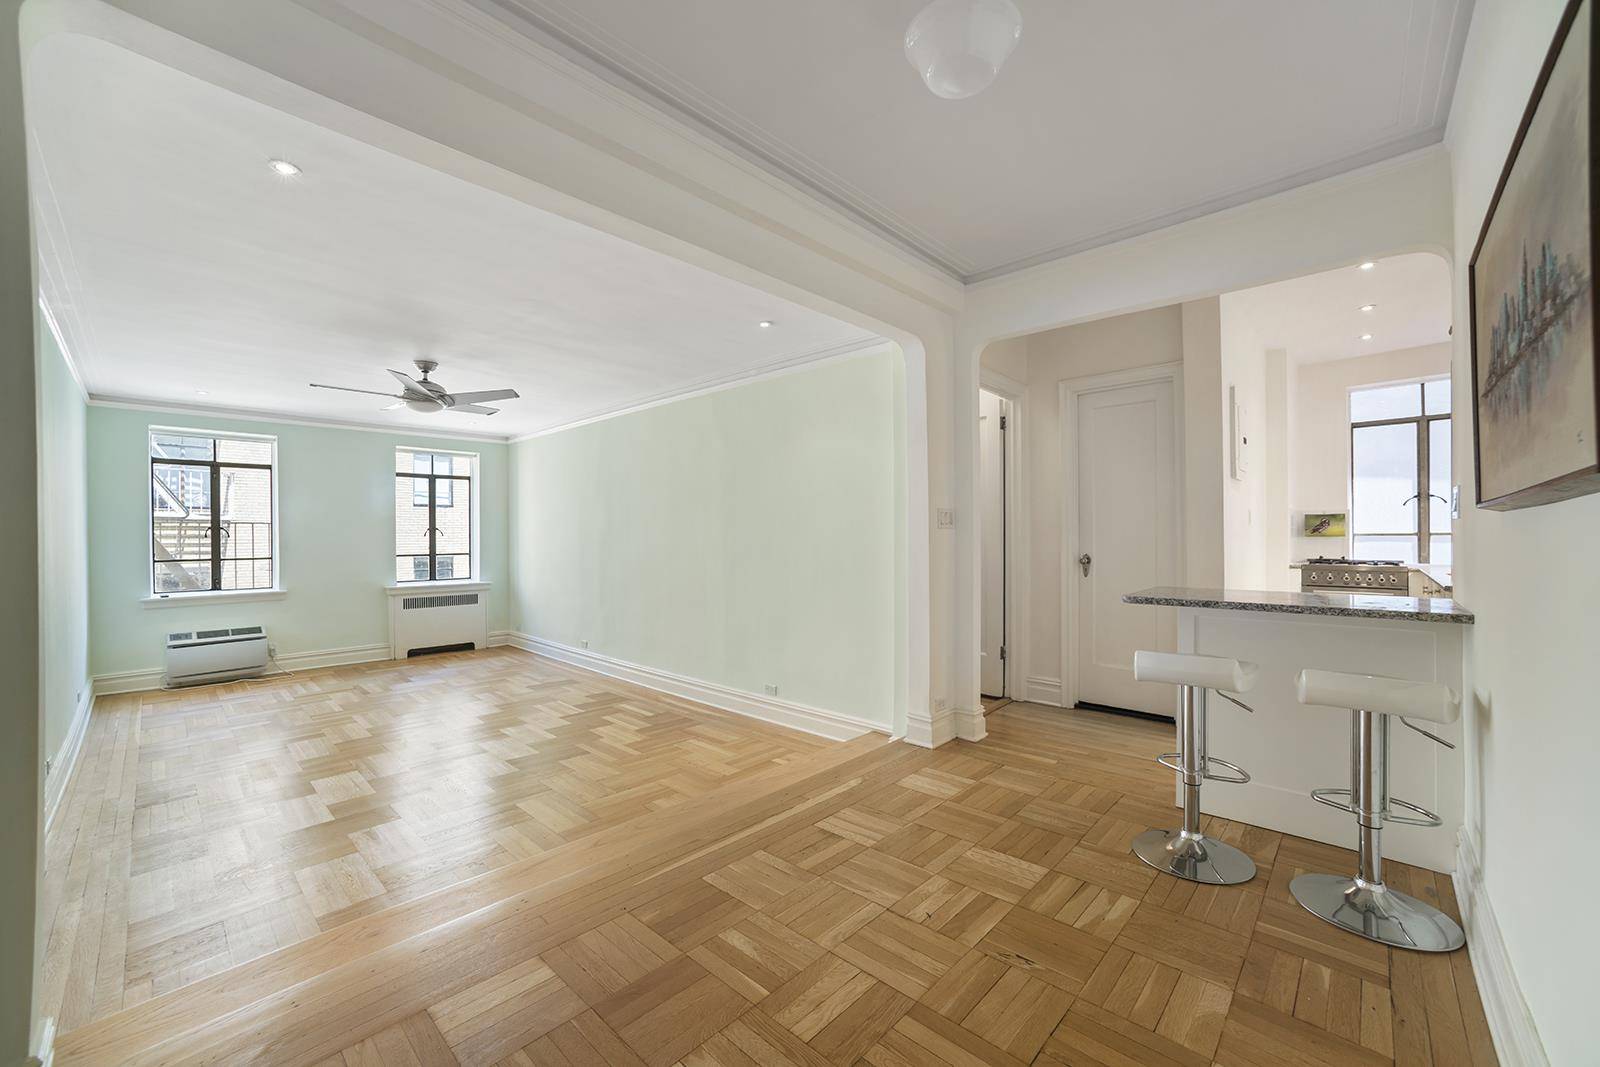 5BE is a classic prewar one bedroom that has been perfectly restored to reflect the art deco style of the Chelsea Gardens complex.